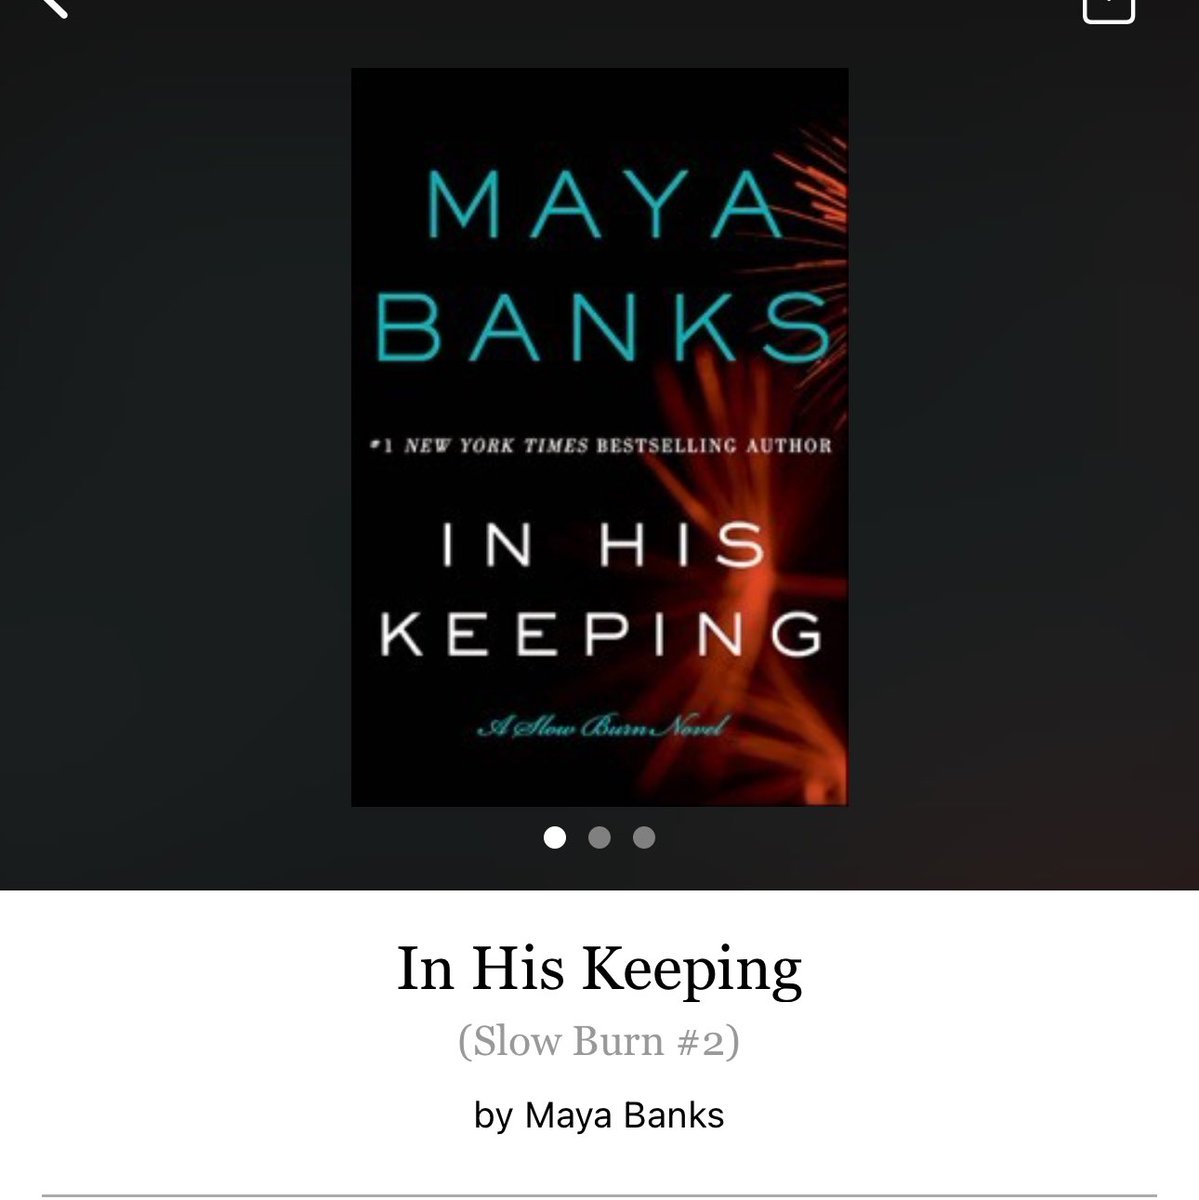 In His Keeping by Maya Banks

#InHisKeeping by #MayaBanks #6283 #40chapters #432pages #432of400 #series #audiobook #69for18 #11houraudiobook #SlowBurnSeries #Houston #AriAndBeau #Book2of6 #april2024 #clearingoffreadingshelves #whatsnext #readitquick